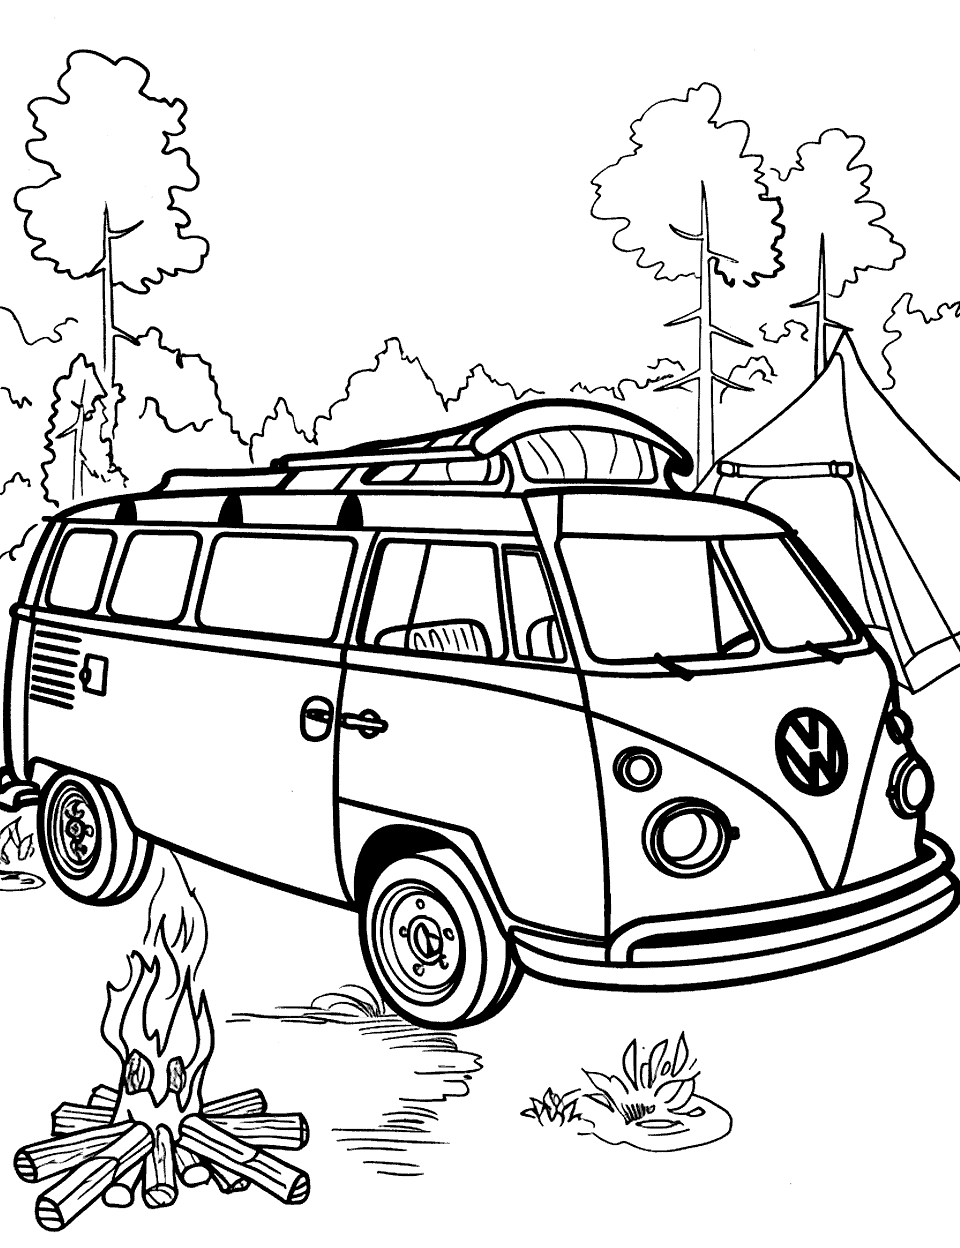 Volkswagen Campout Coloring Page - A Volkswagen bus parked at a campsite, with a campfire and a single tent nearby.